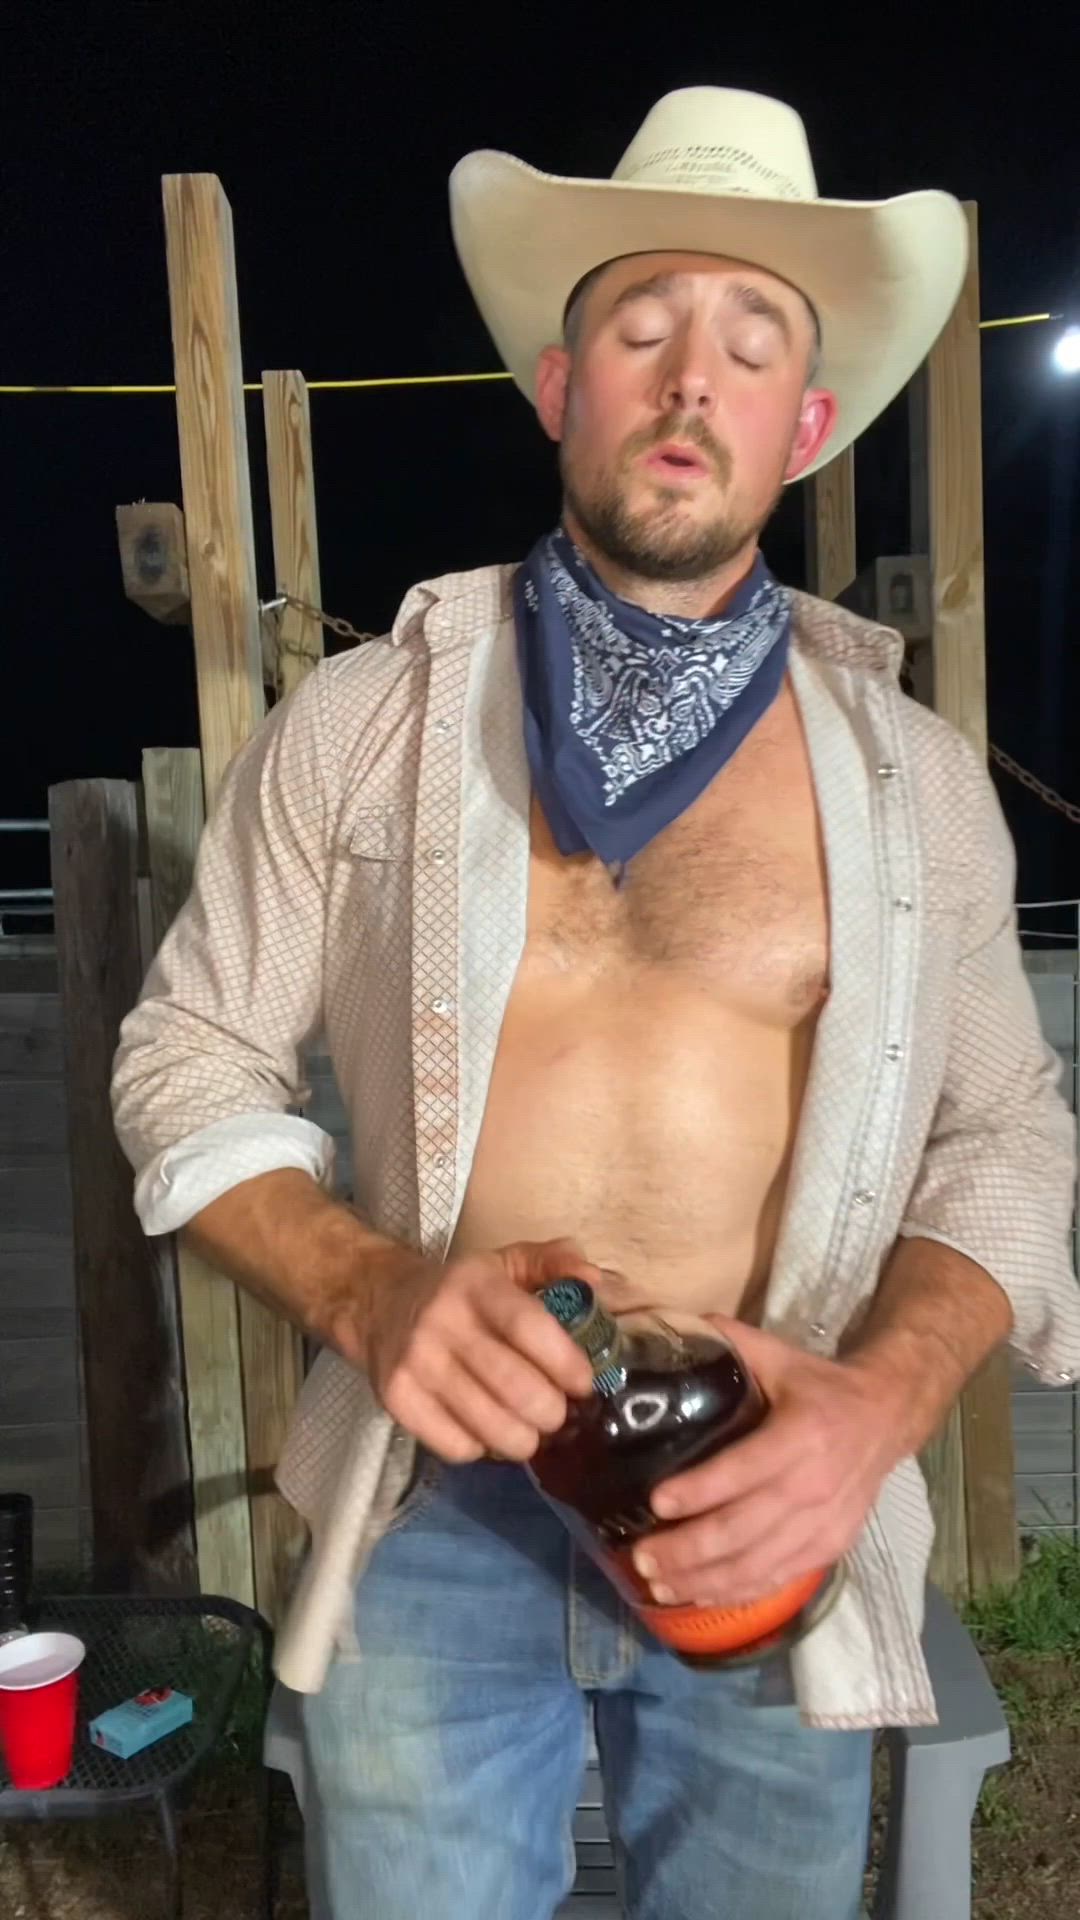 Amateur porn video with onlyfans model xlcowboy <strong>@xlcowboy</strong>